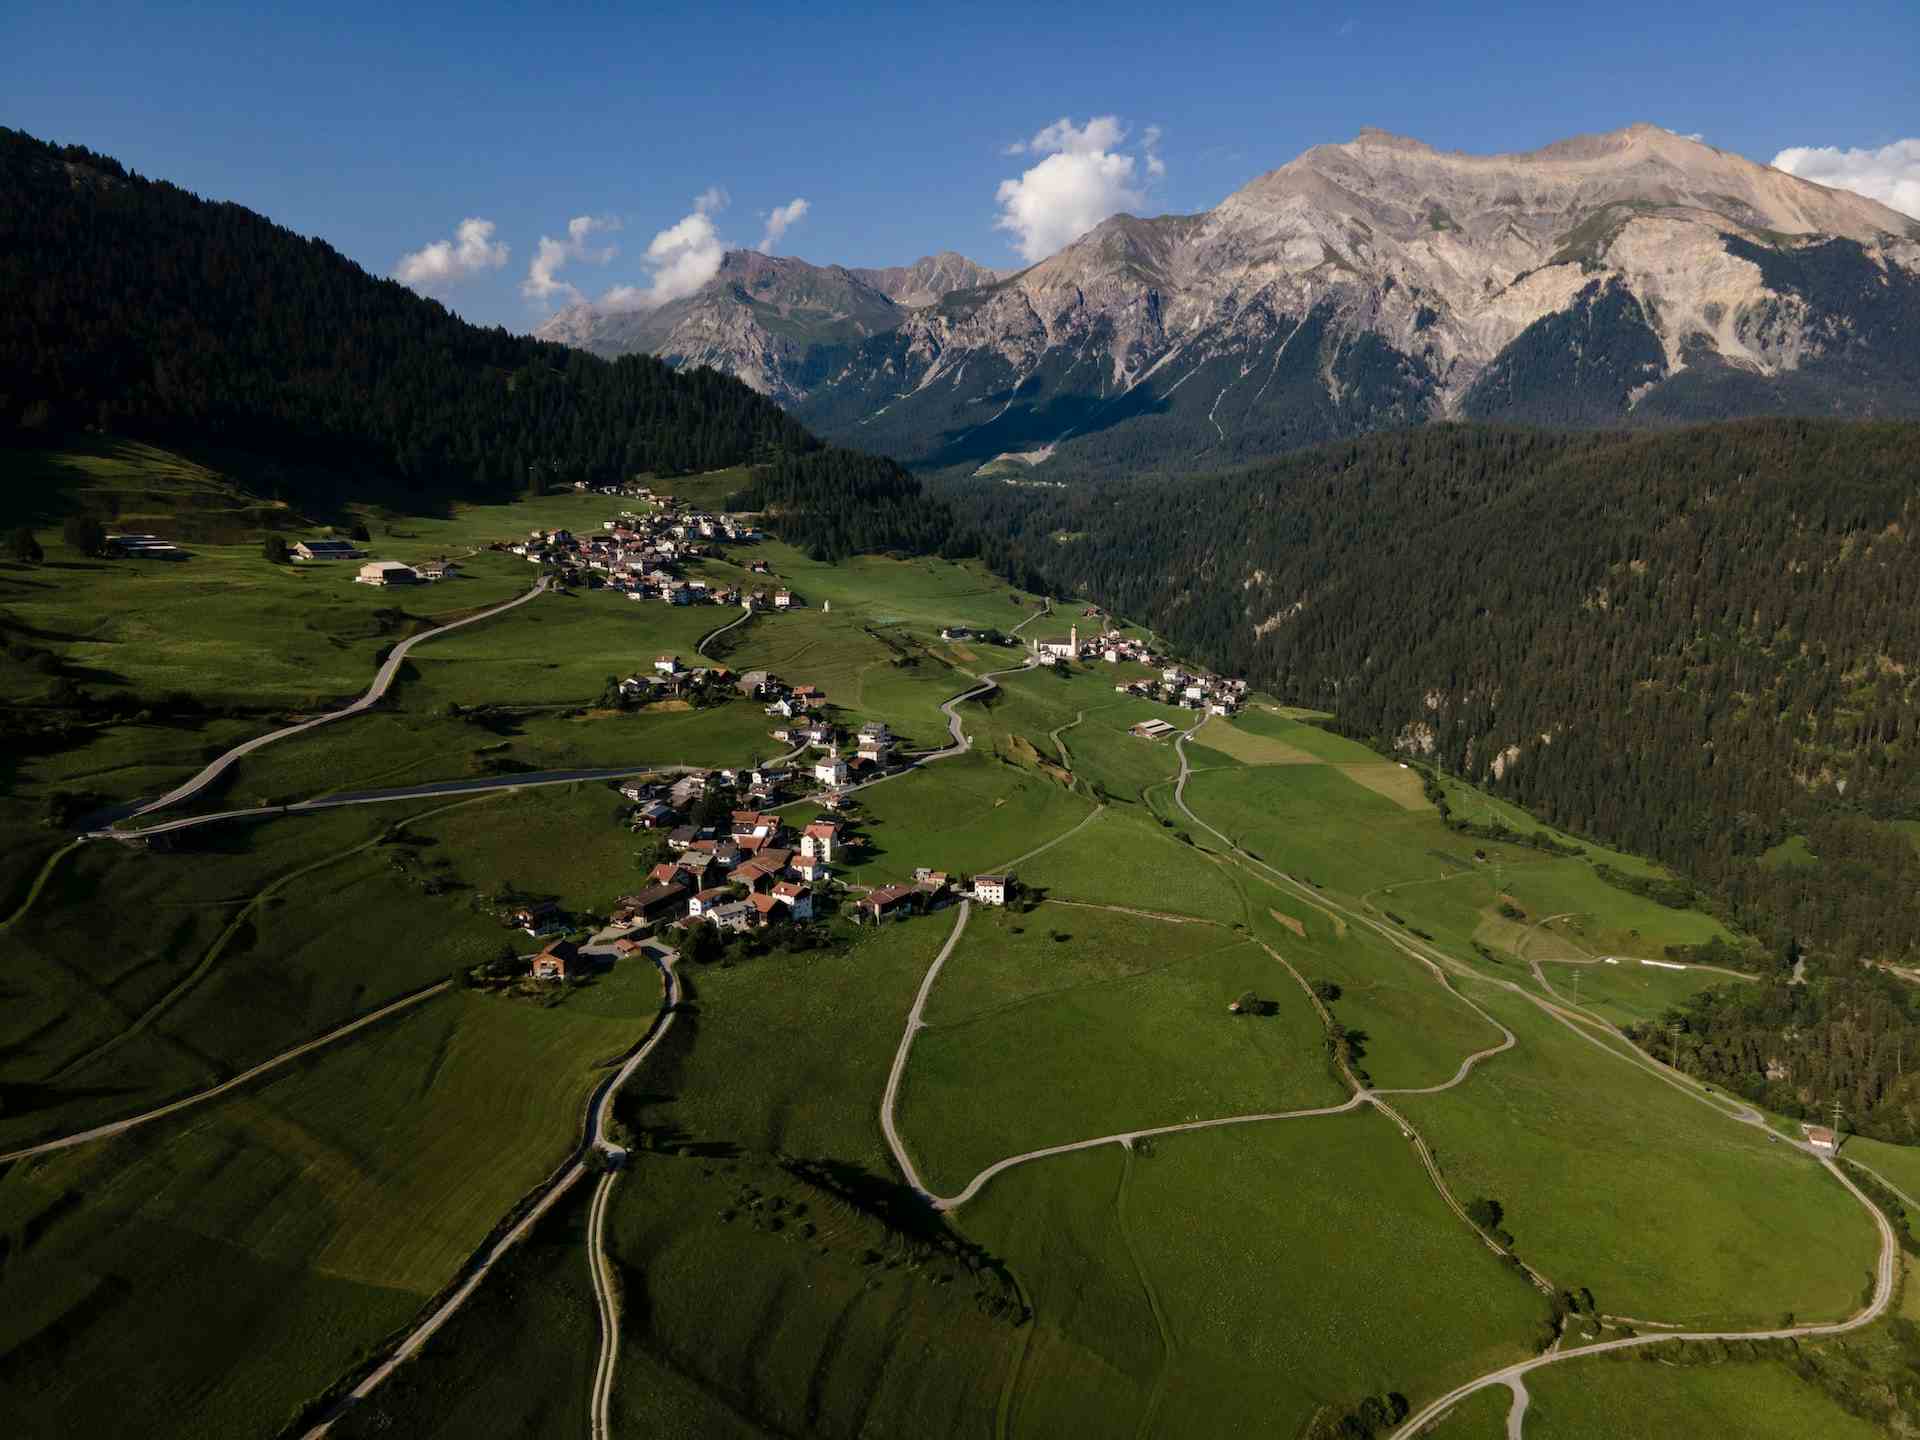 Geiss- Pur, producer in Pany canton of Graubünden in Switzerland